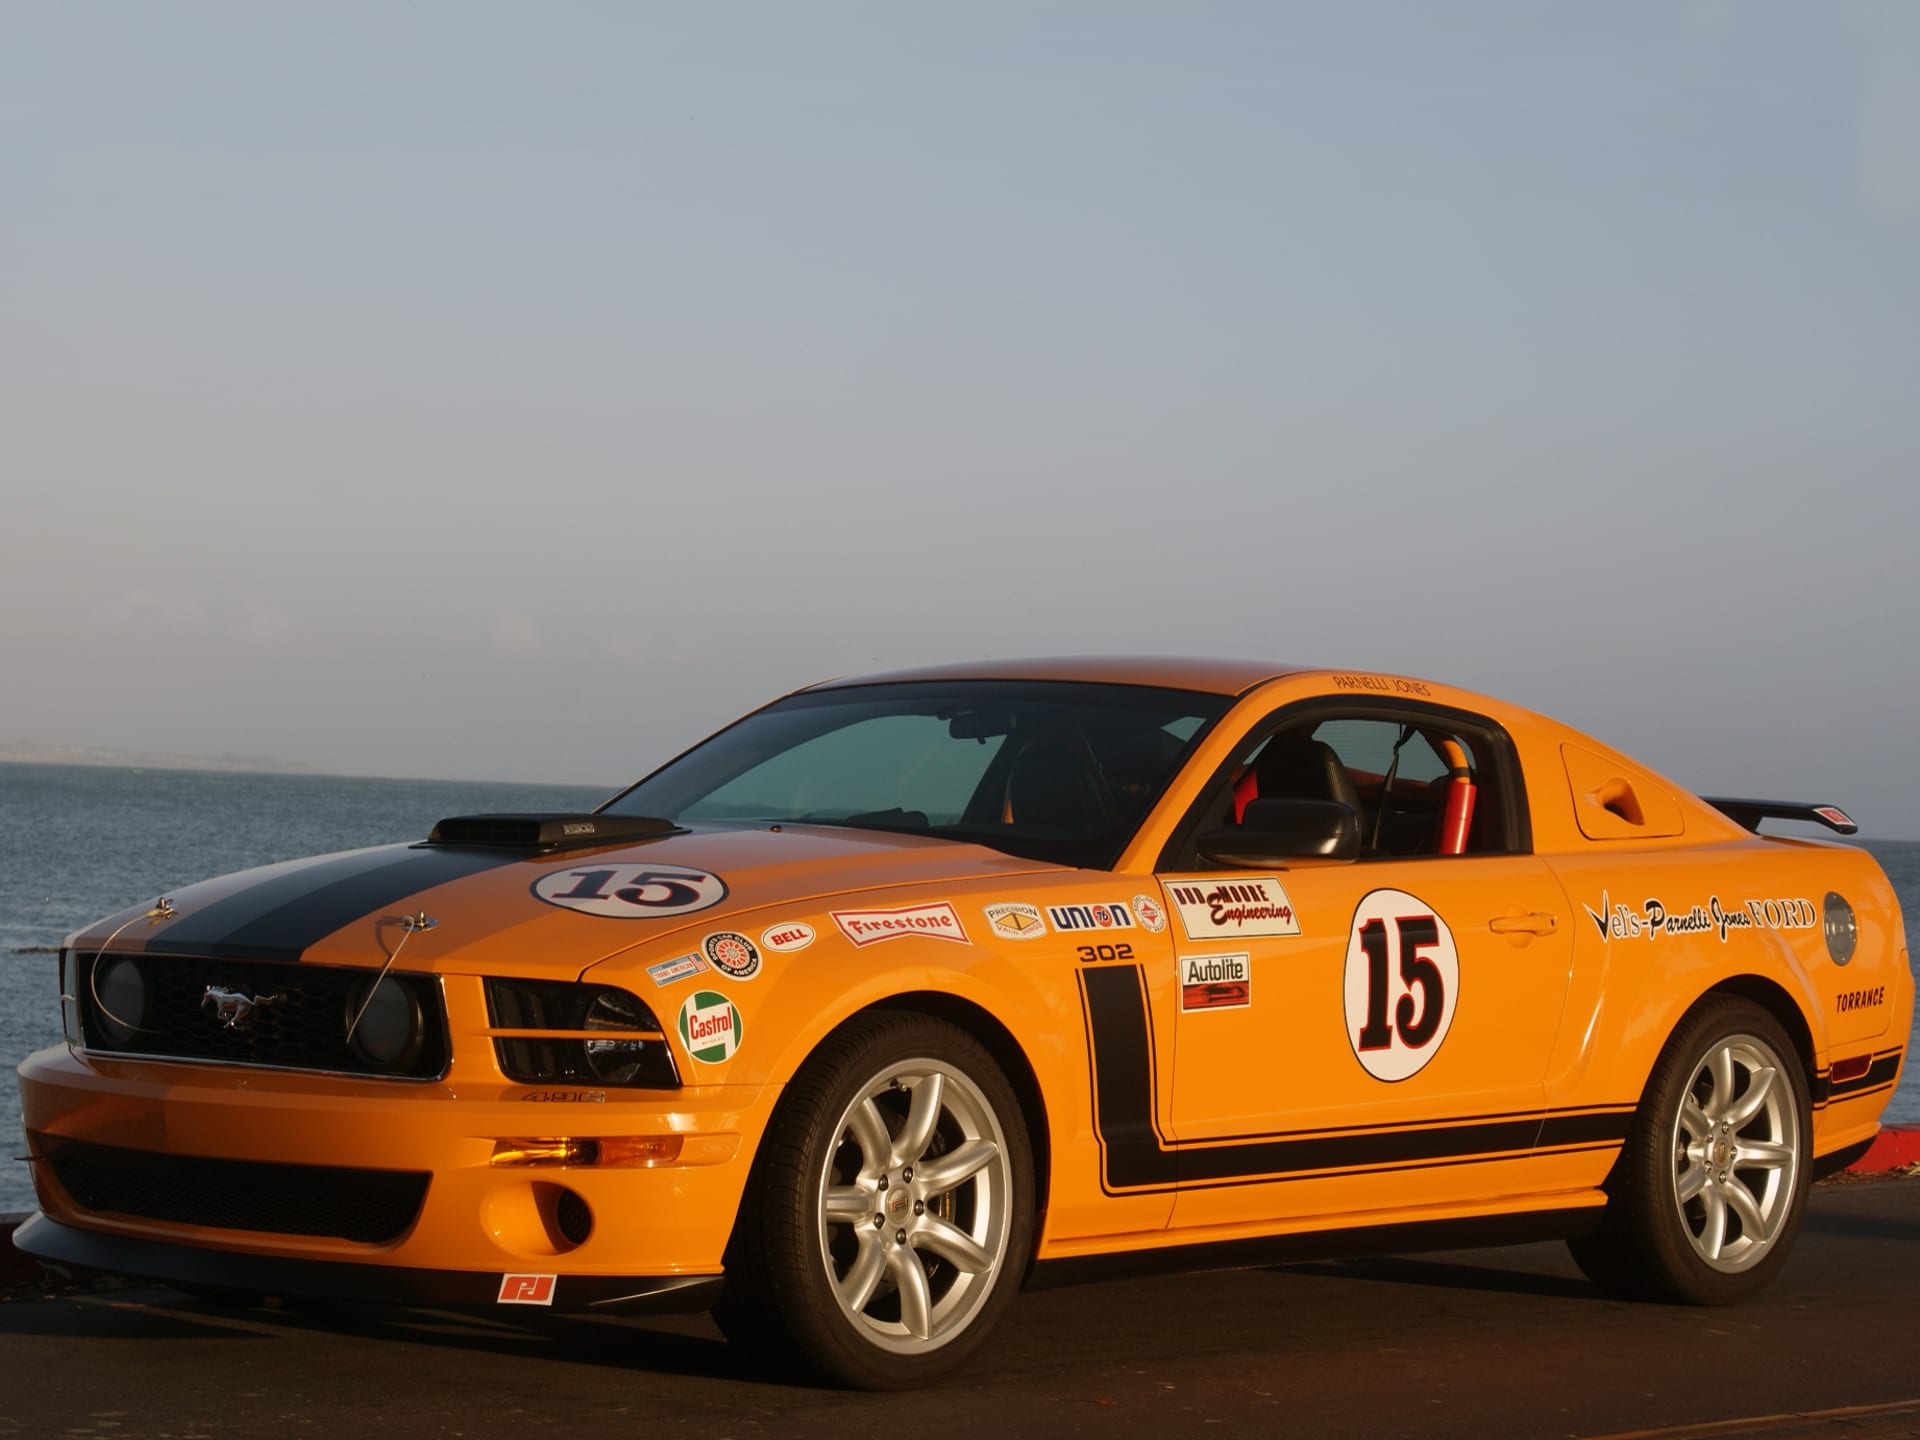 2007 Ford Mustang Saleen Parnelli Jones Edition At Anaheim 2013 As F158 Mecum Auctions 